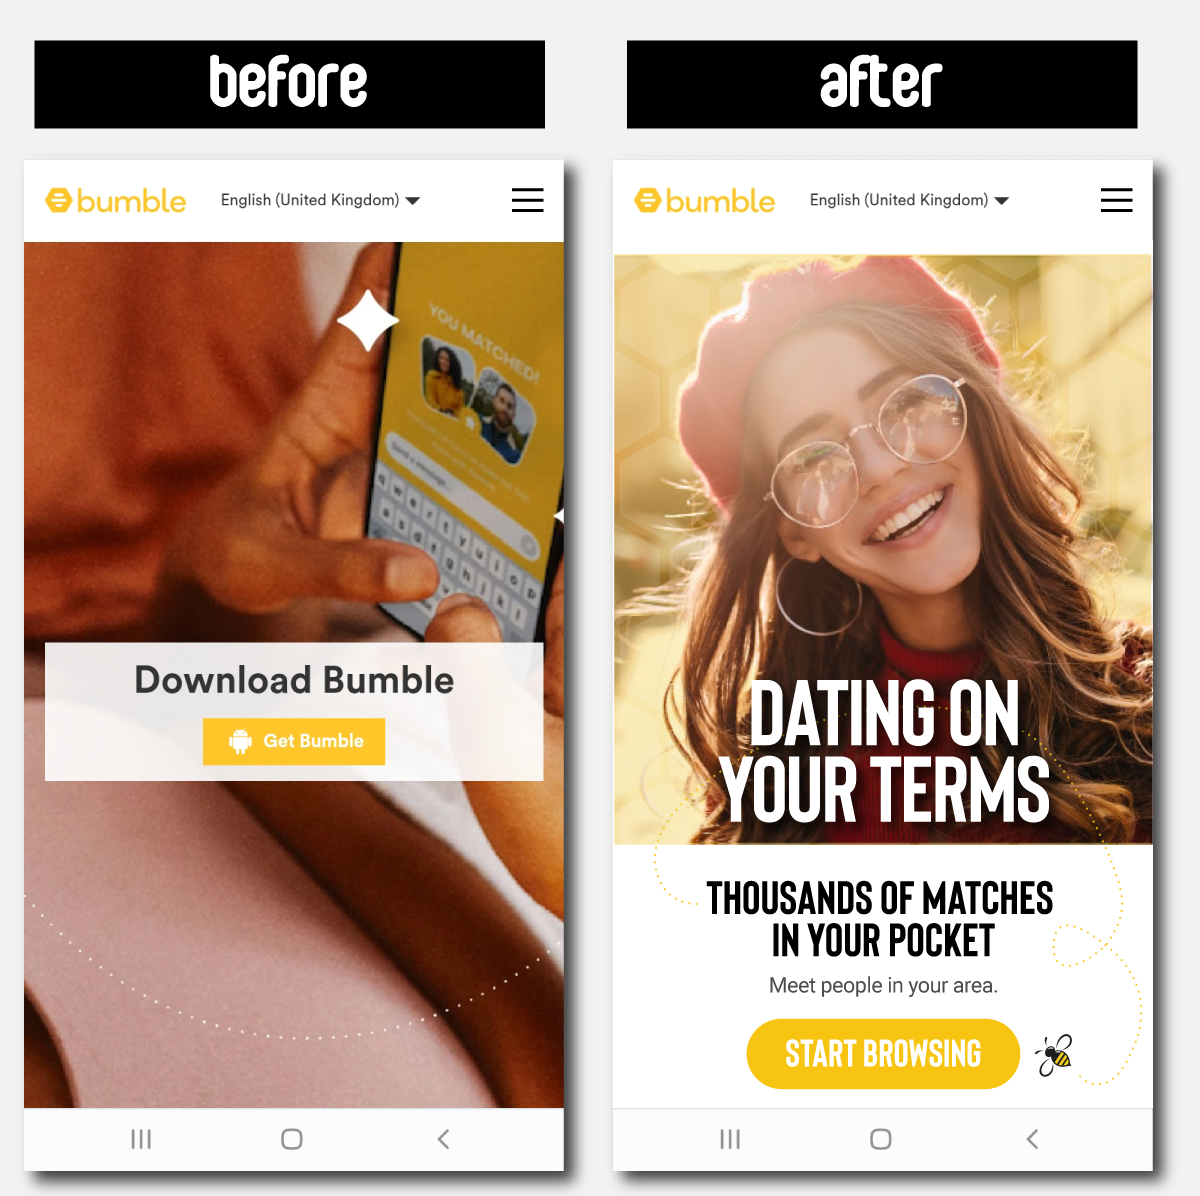 Bumble website redesign